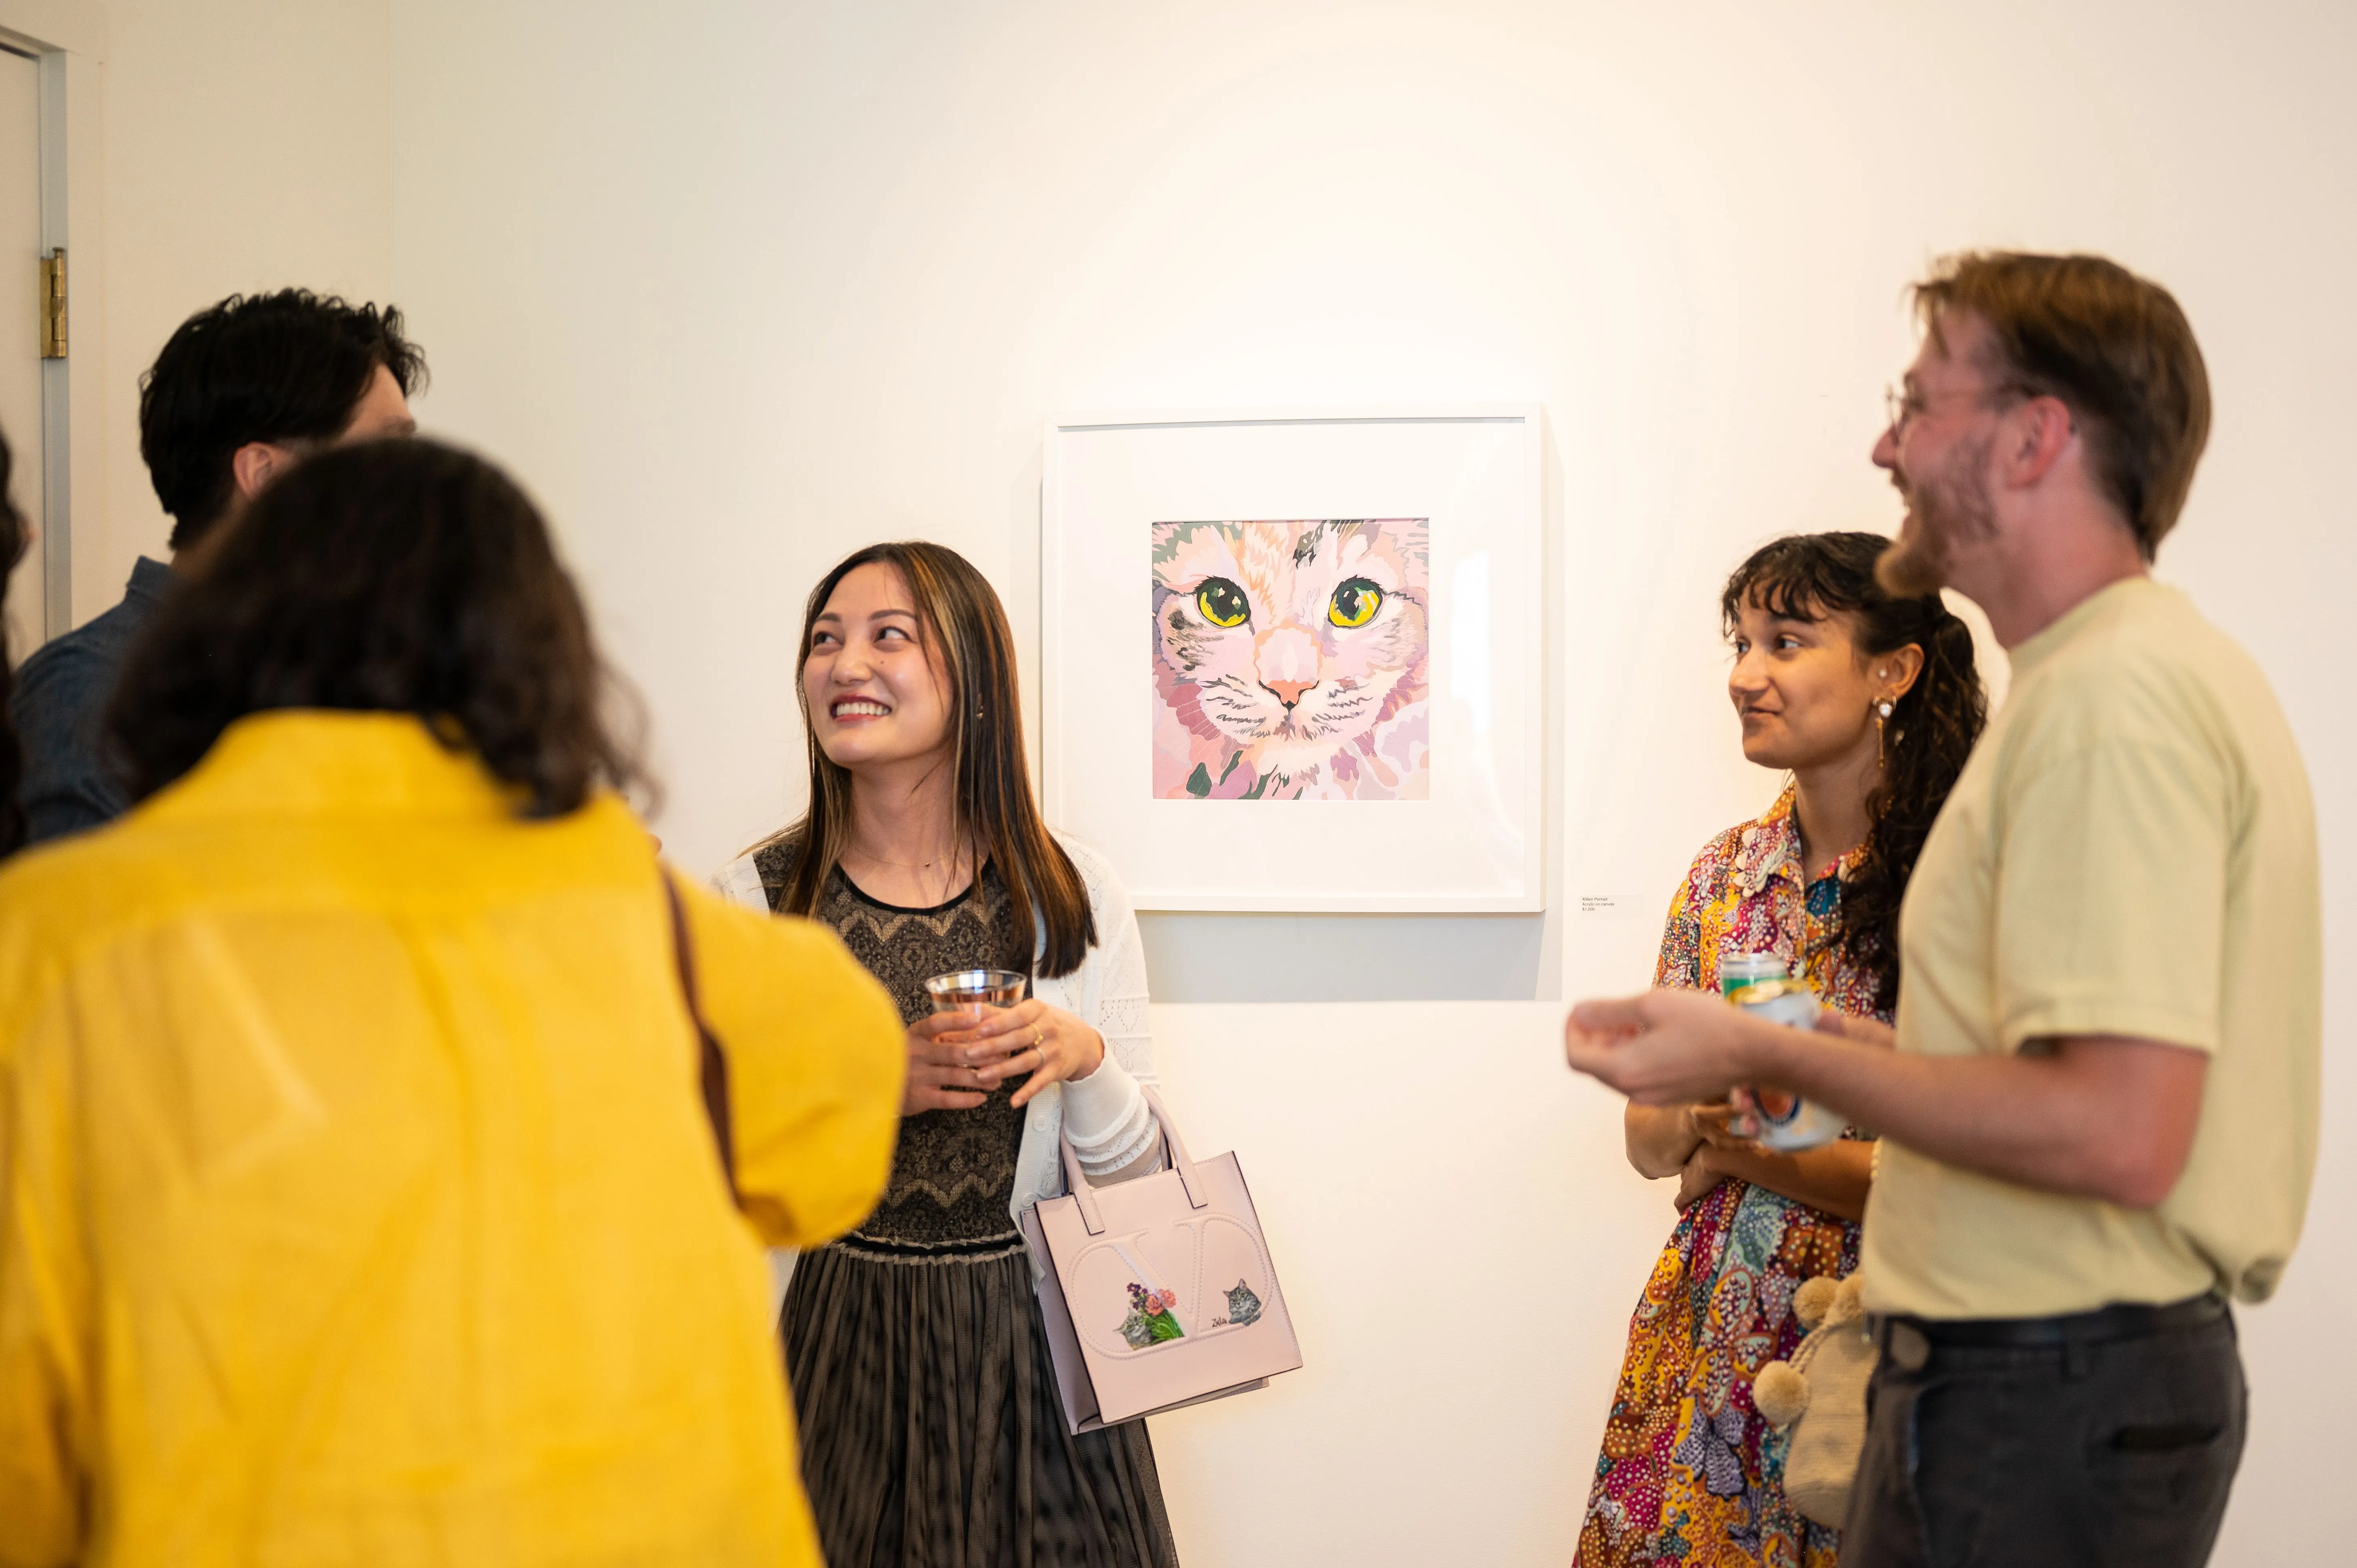 Group of people engaging in conversation at an art gallery, with a colorful artwork of a cat on the wall in the background.